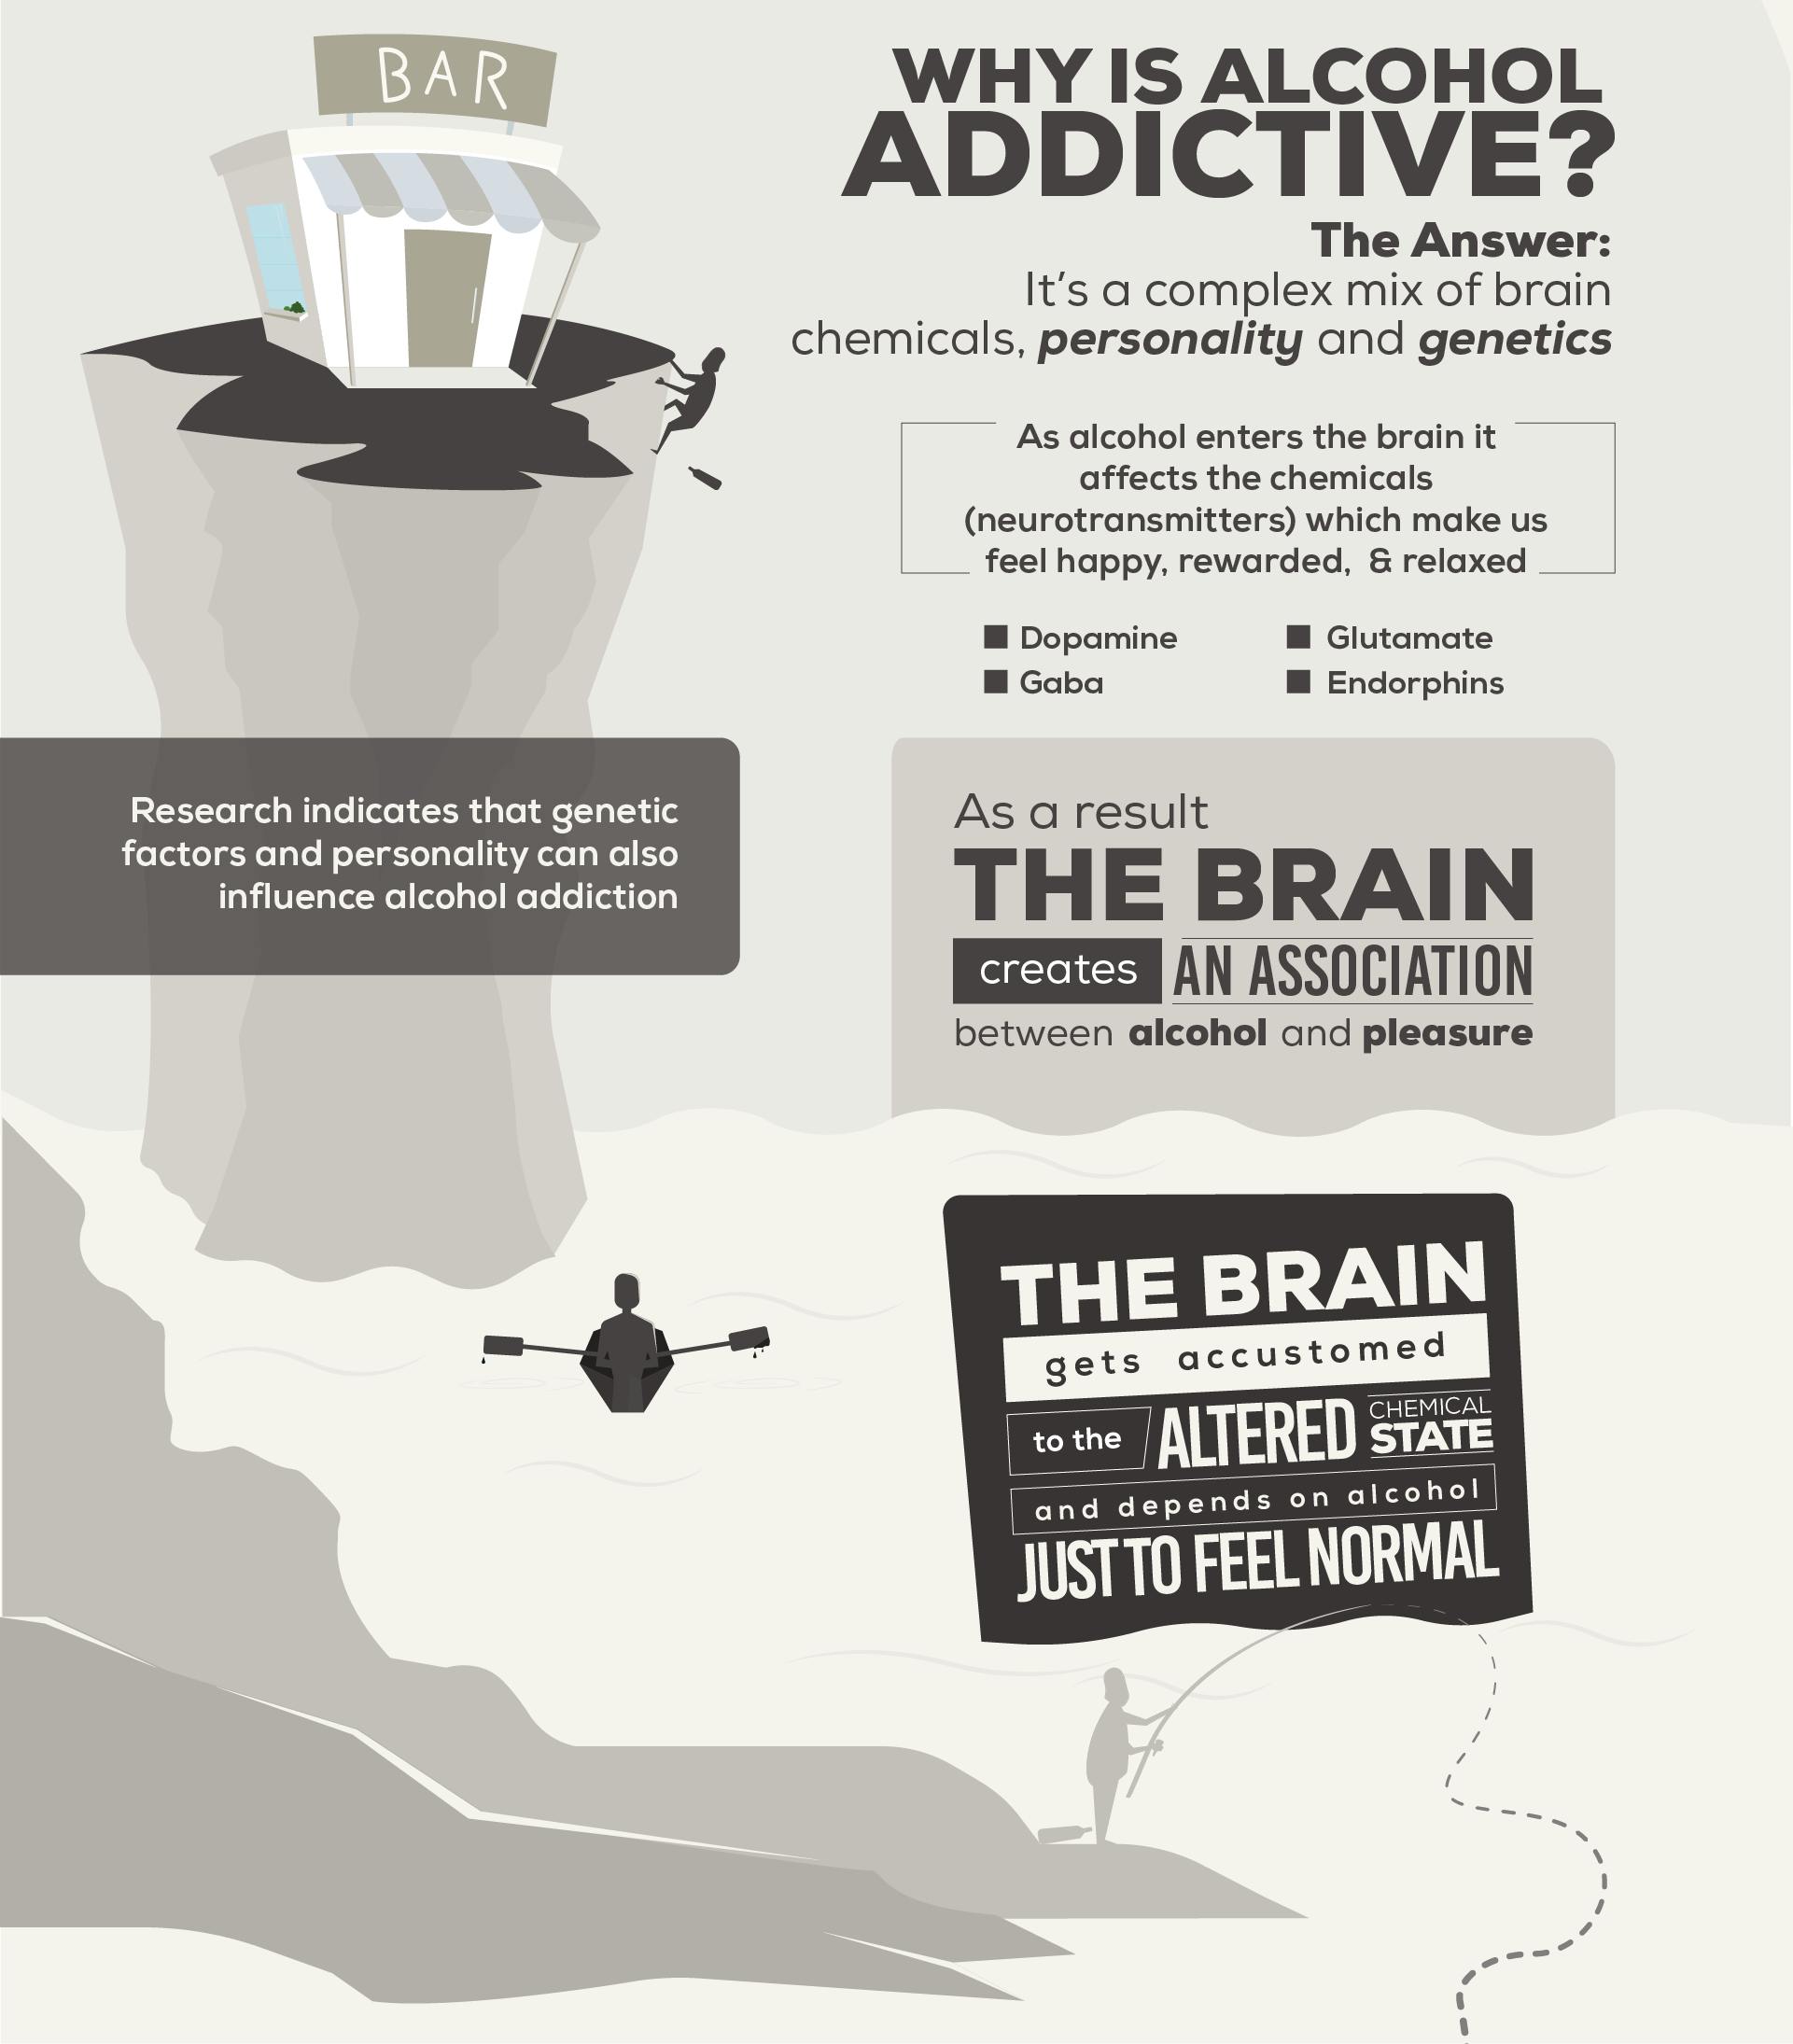 Why is Alcohol Addictive?